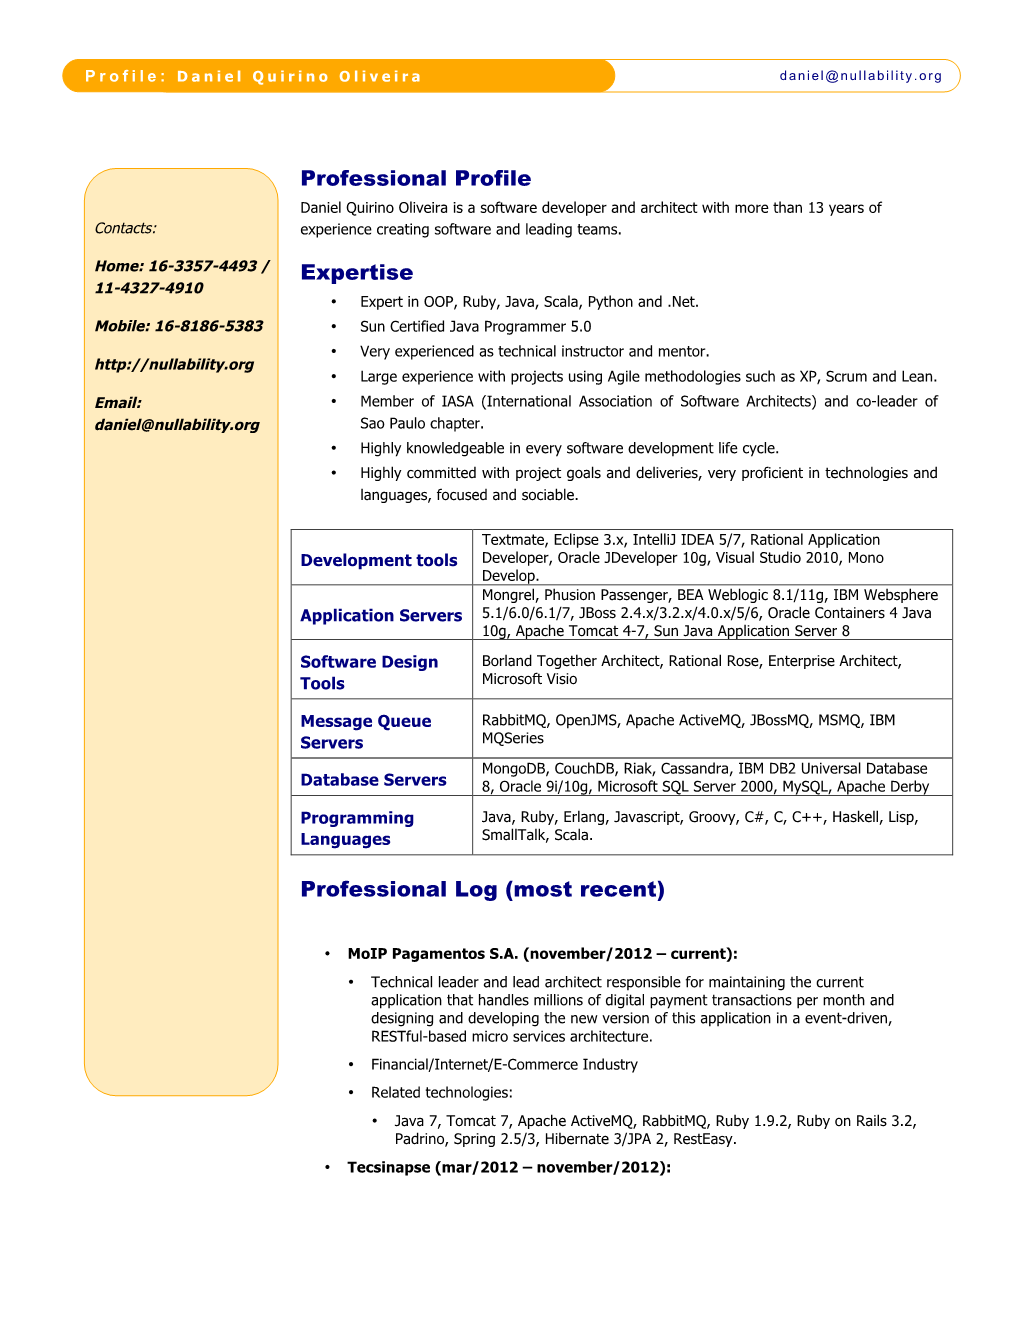 Professional Profile Expertise Professional Log (Most Recent)